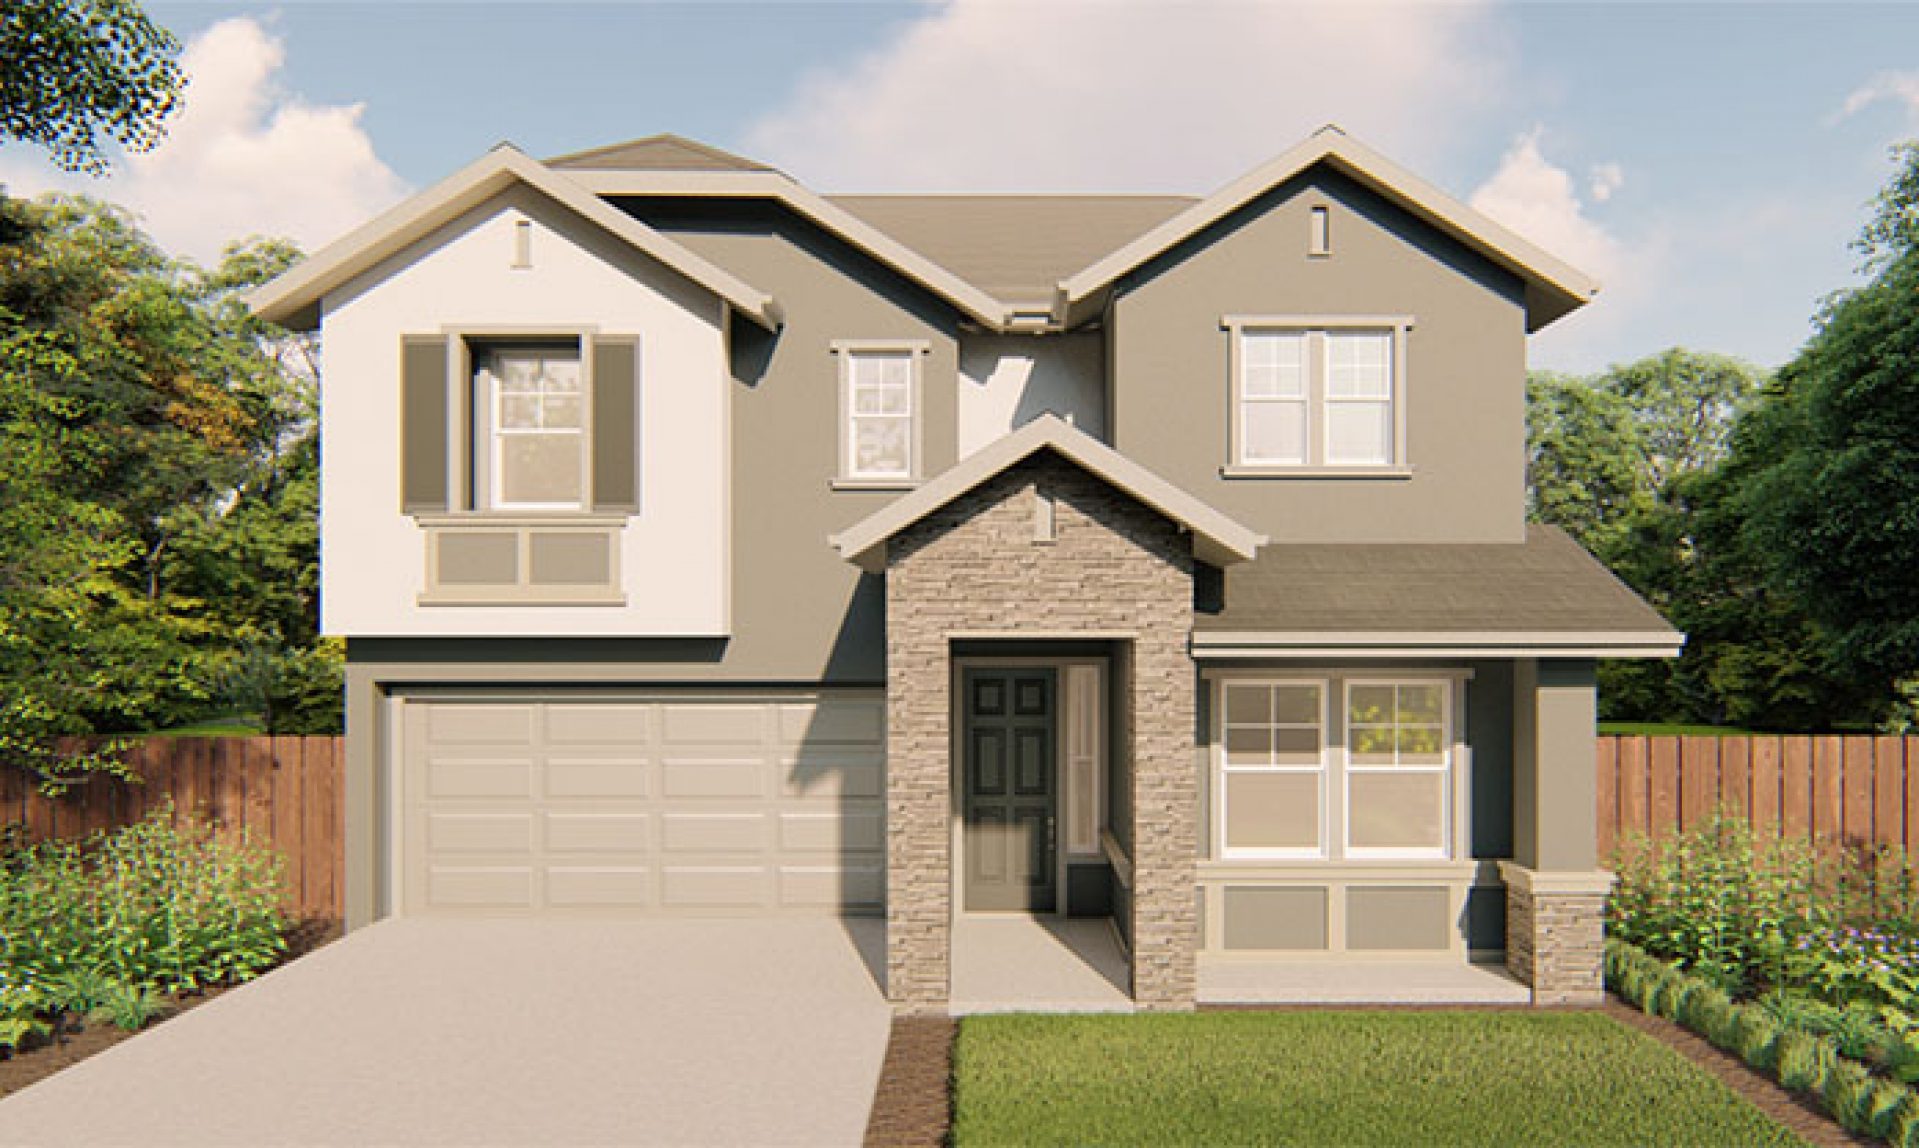 Modern Darby-B Floorplan in New Homes Collection